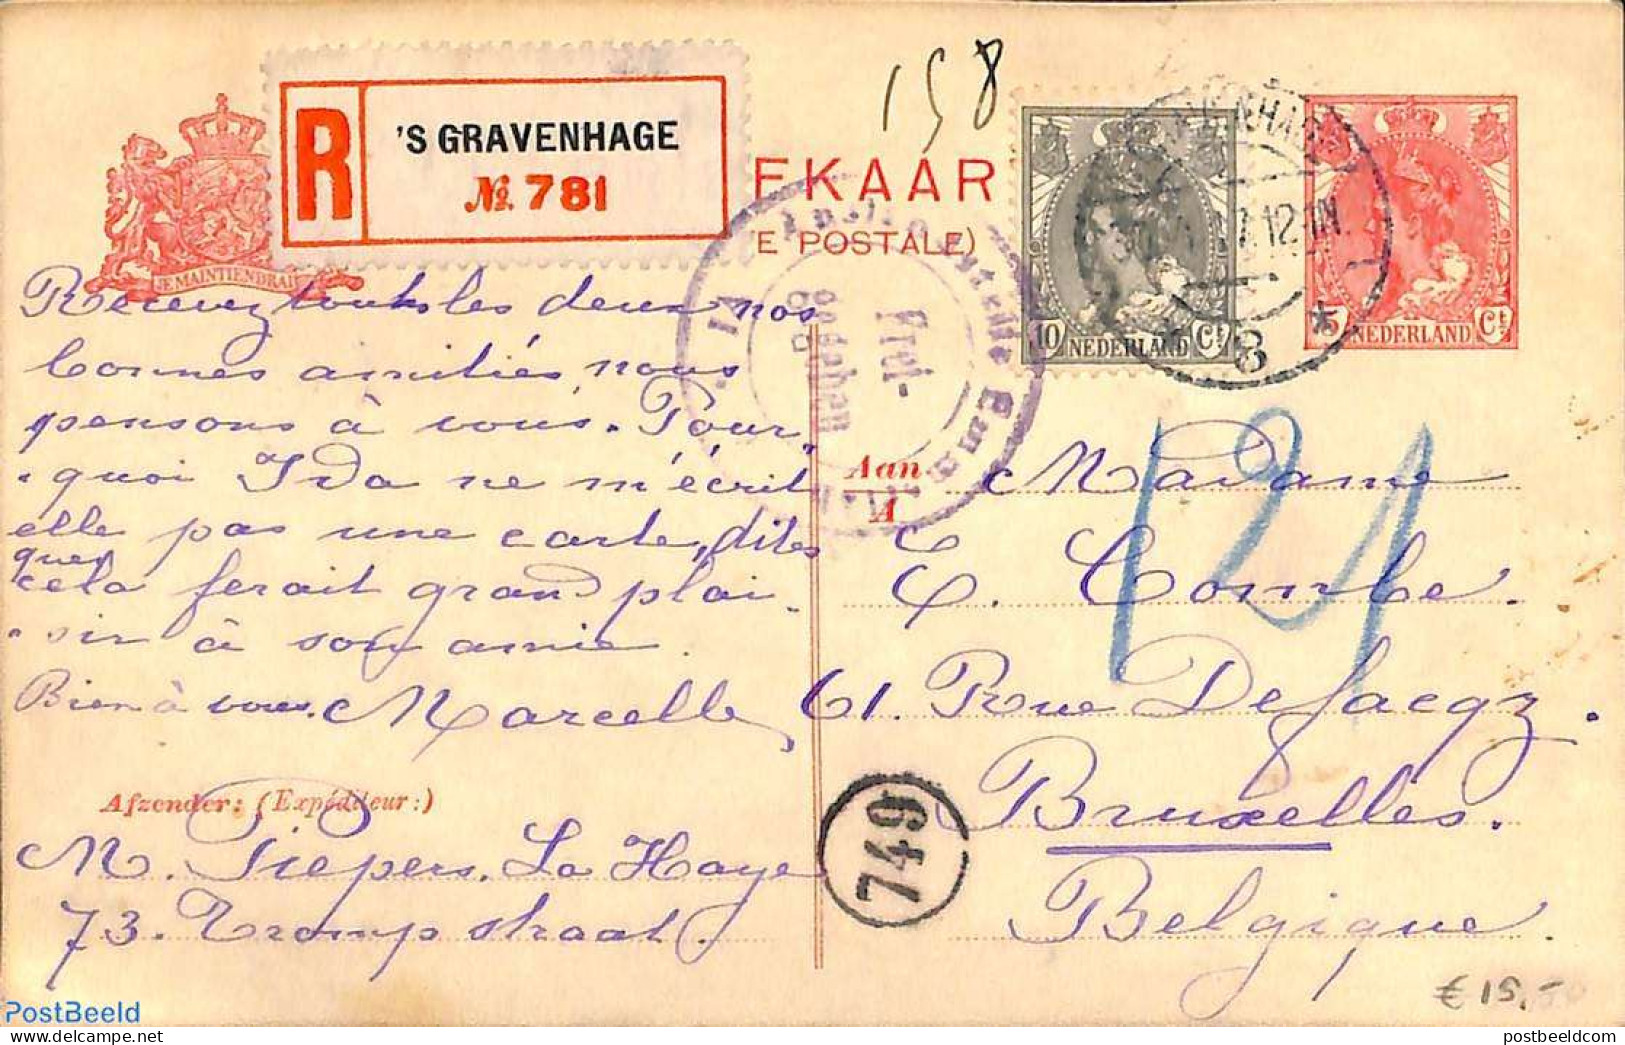 Netherlands 1917 Postcard 5c, Uprated With 10c Stamp To Registered Mail To Belgium, Censored, Postal History - Brieven En Documenten